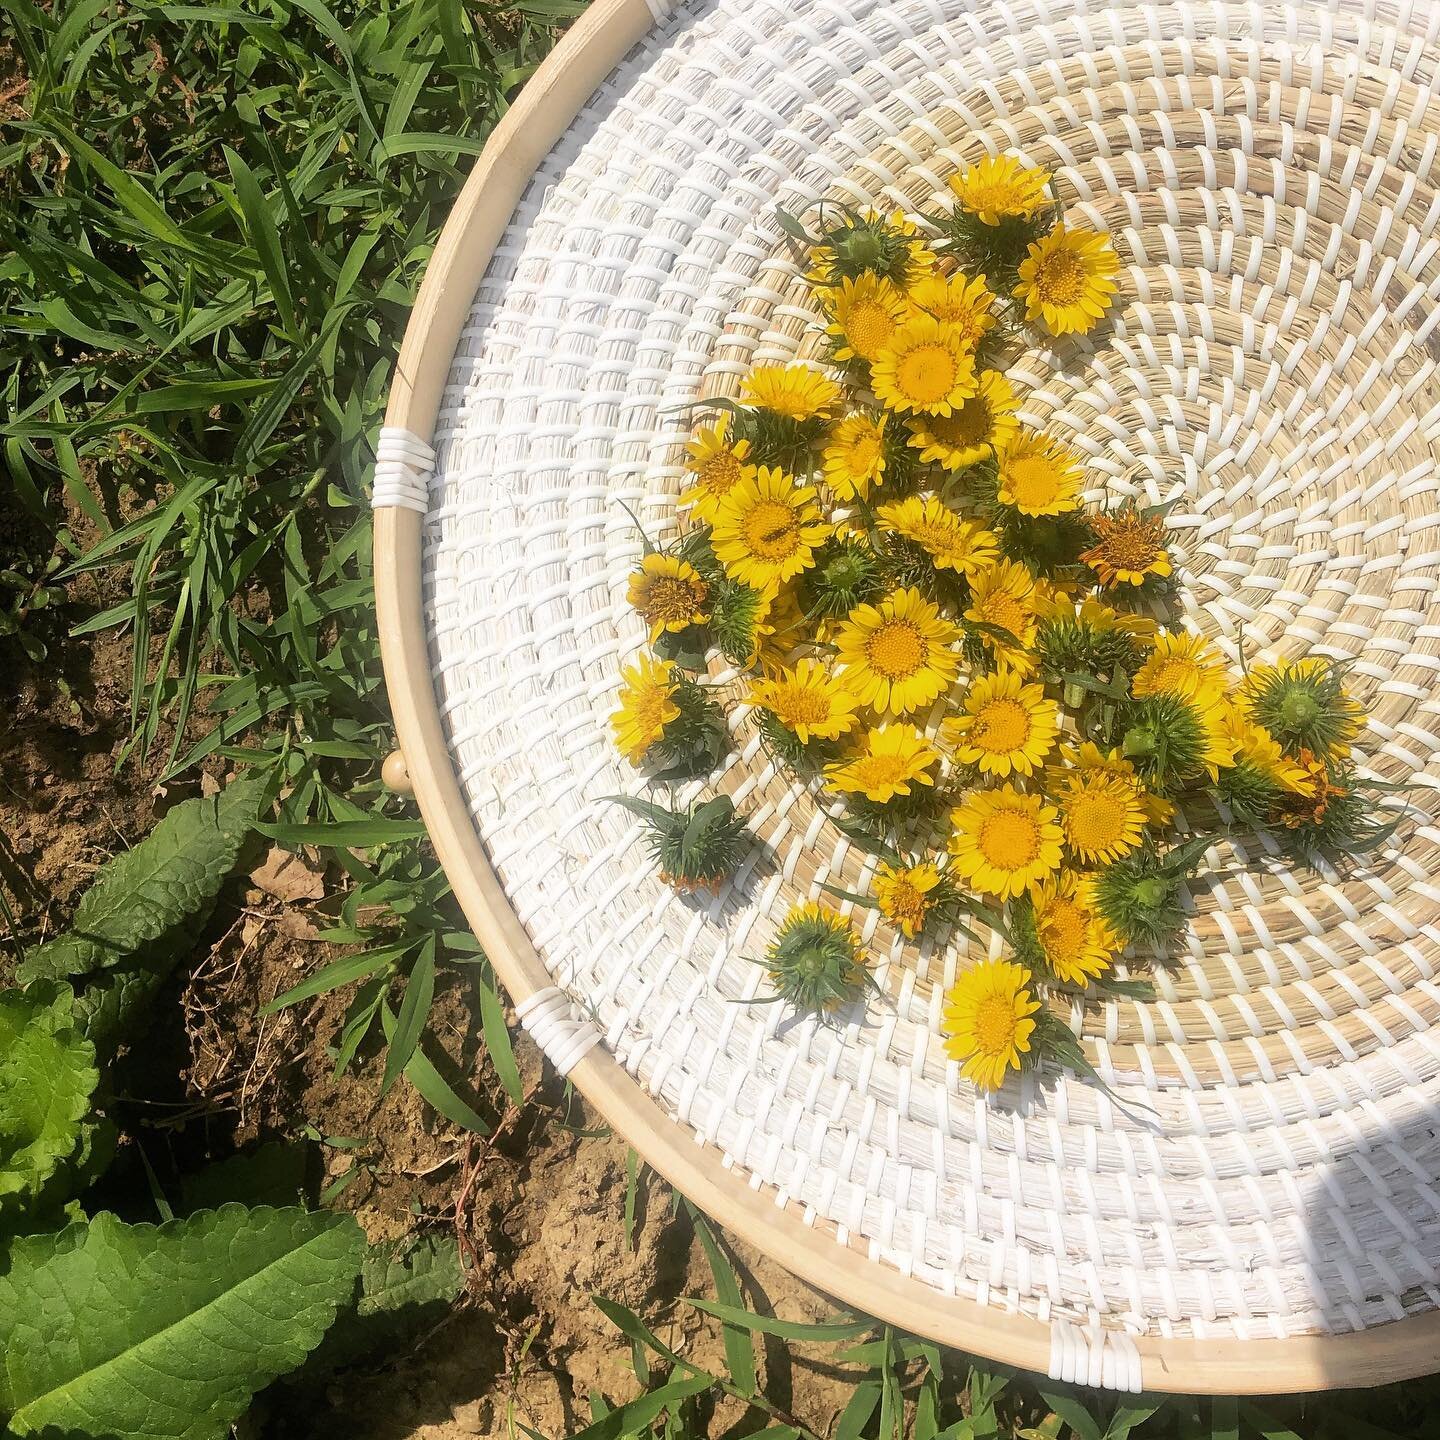 Get that stagnant mucus cleared out with this surprisingly yummy blend of gumweed, cinnamon, and peppermint leaf and essential oil infused into organic apple cider vinegar and local raw honey. It is fast-acting when you need it most. ⁣Gumweed was lov